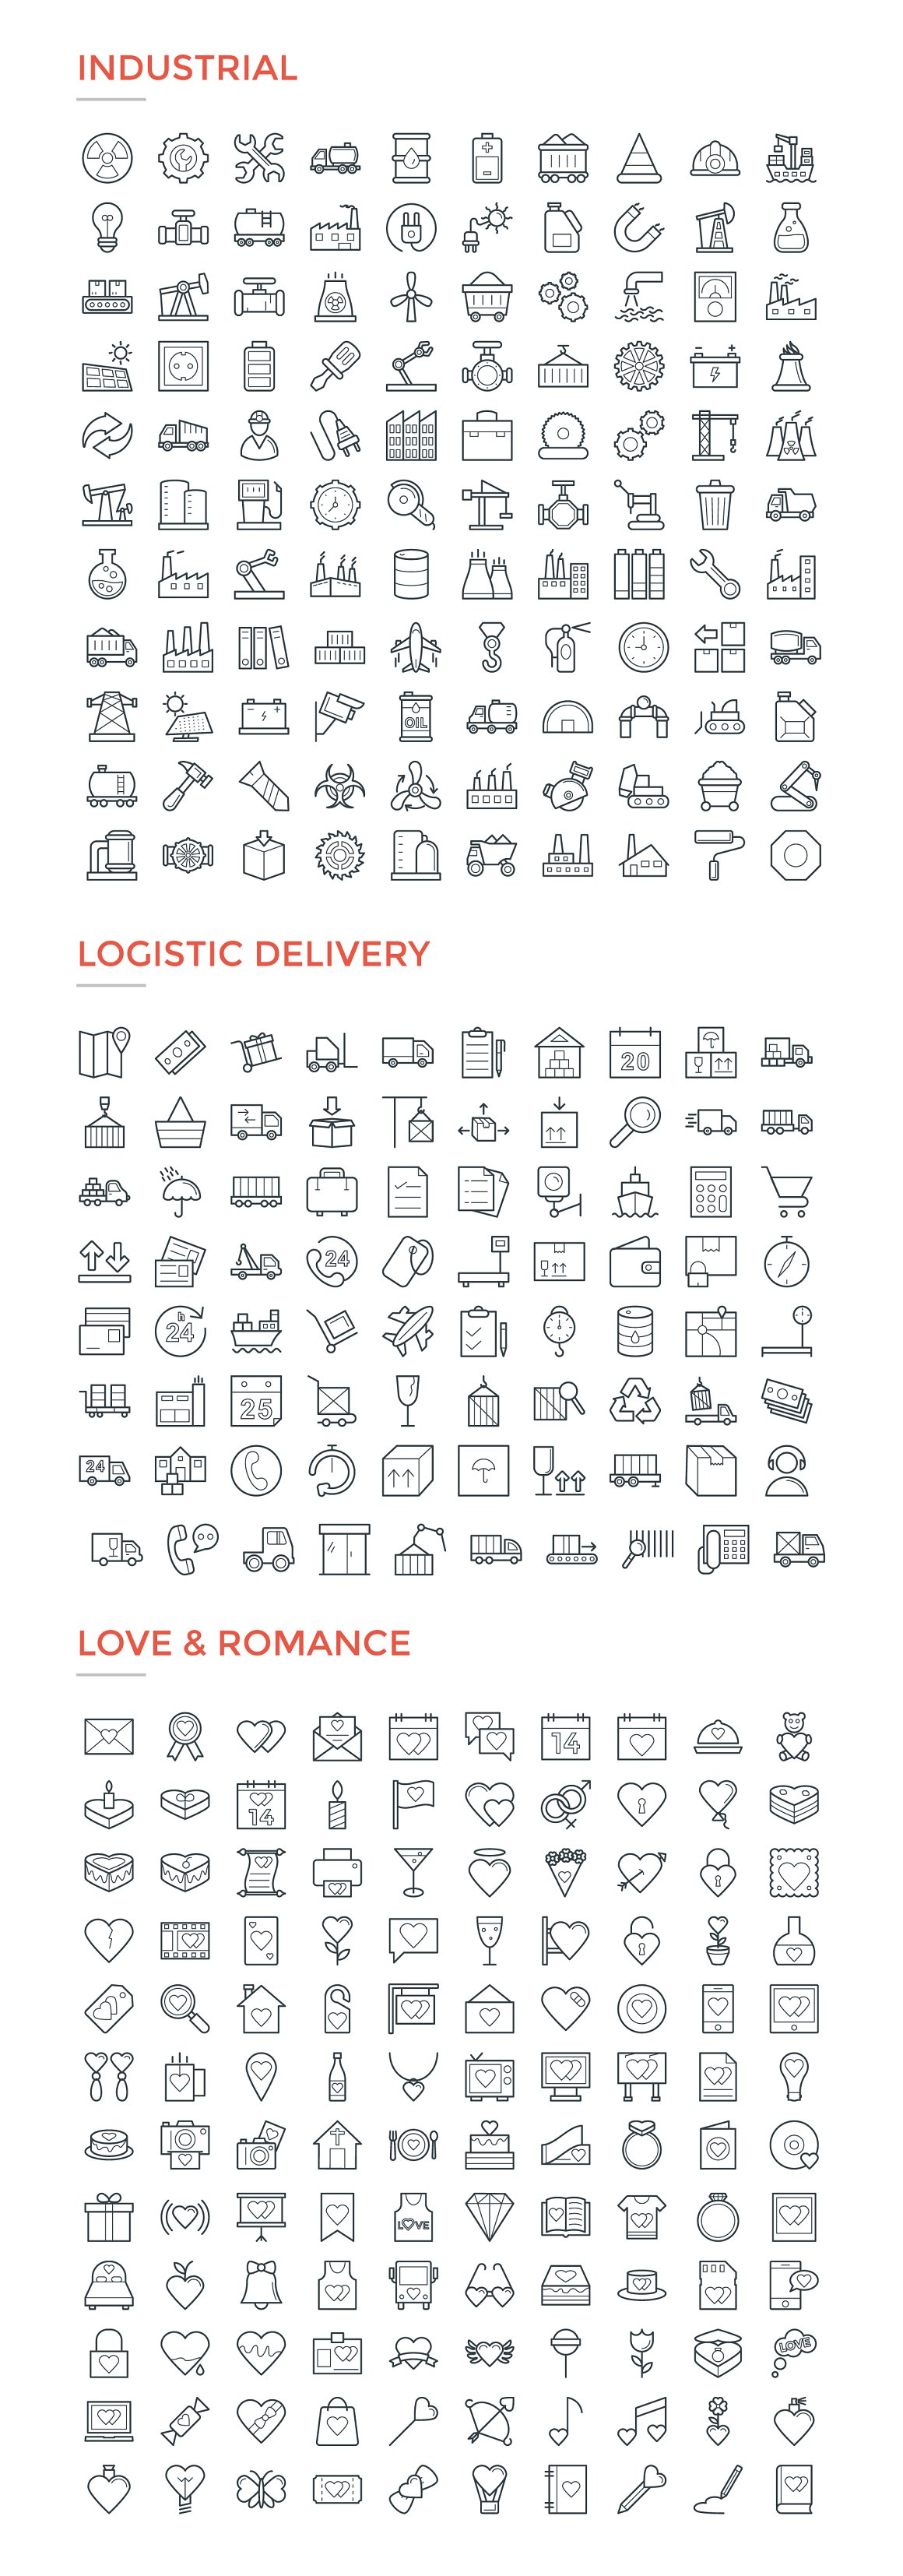 Big kit in black of industrial, logistic delivery and love & romance icons on a white background.